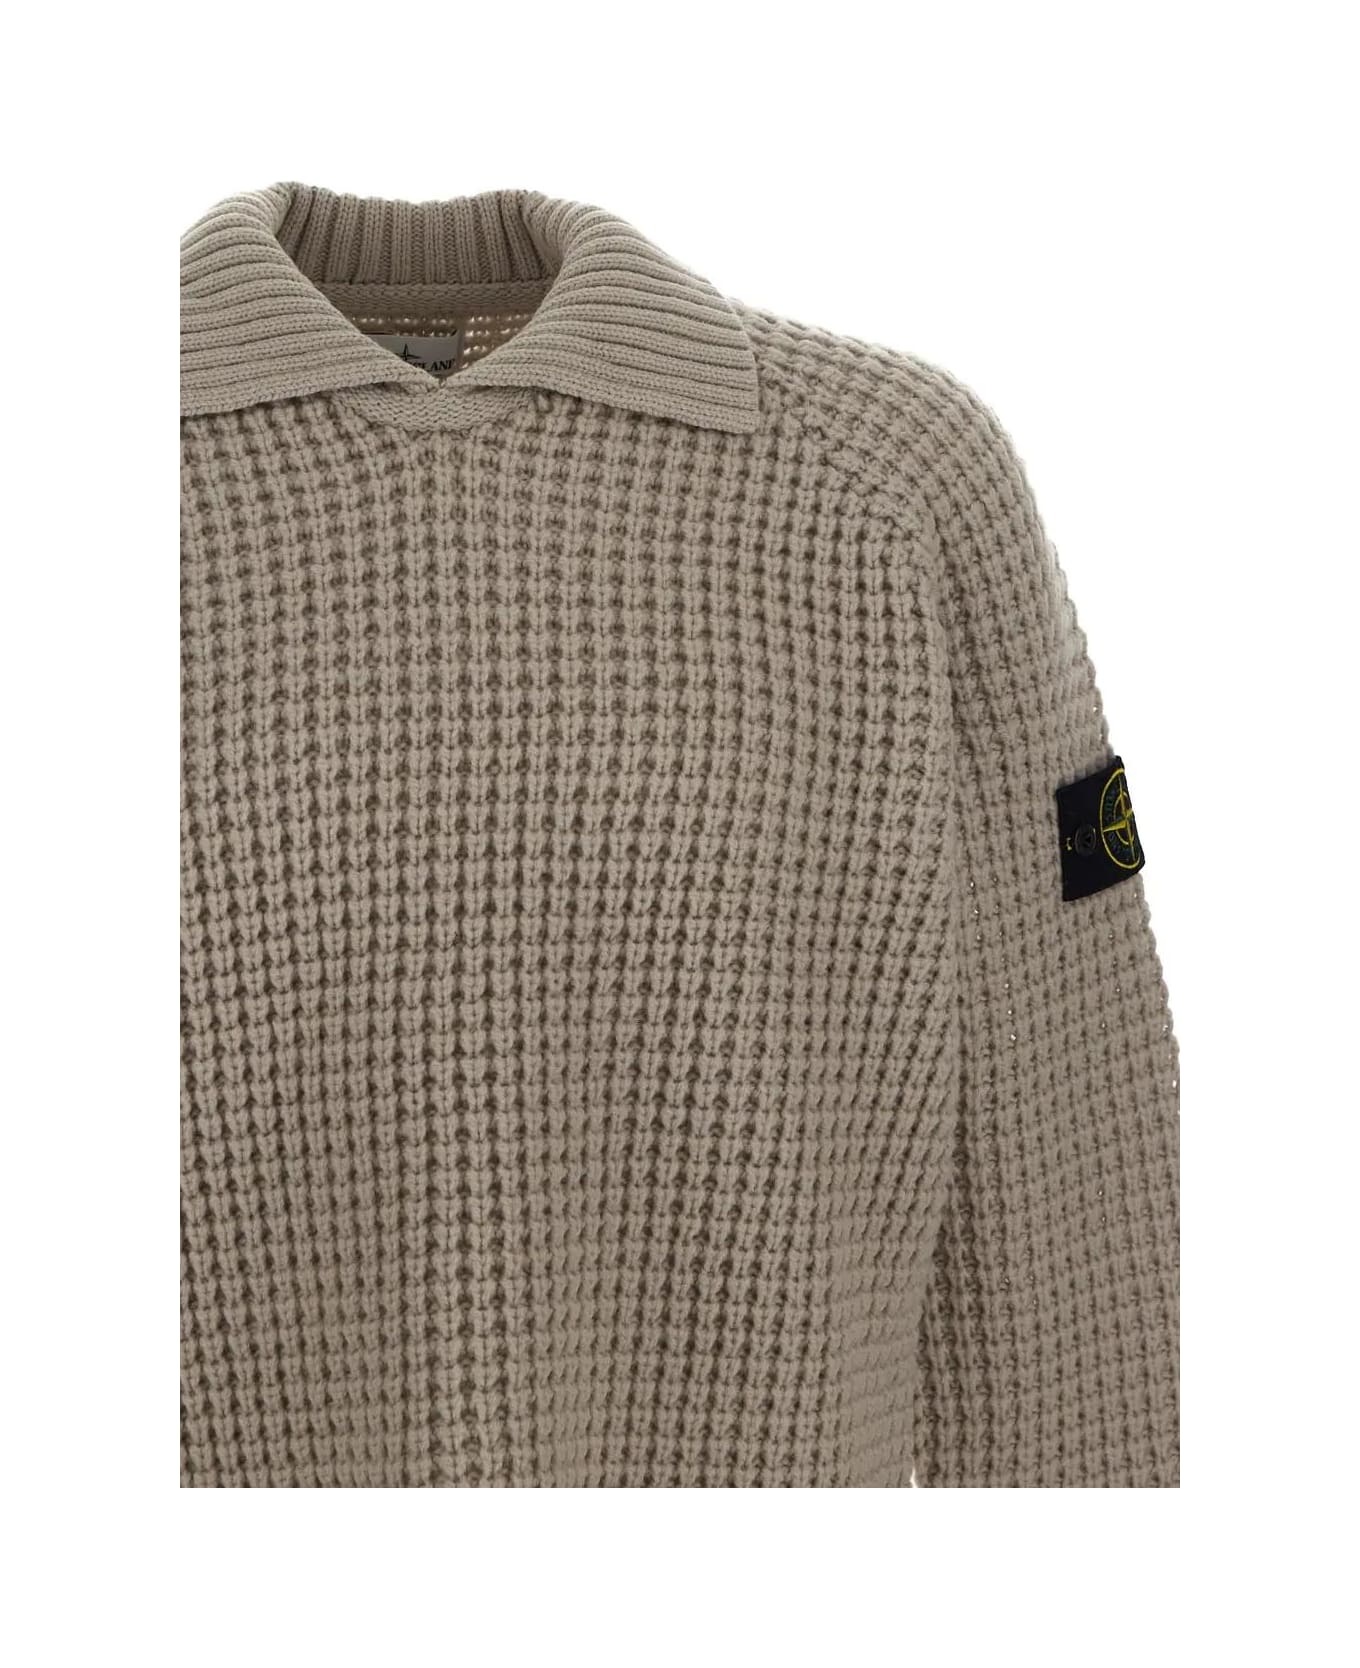 Stone Island Compass Patch Collared Jumper - BEIGE ニットウェア